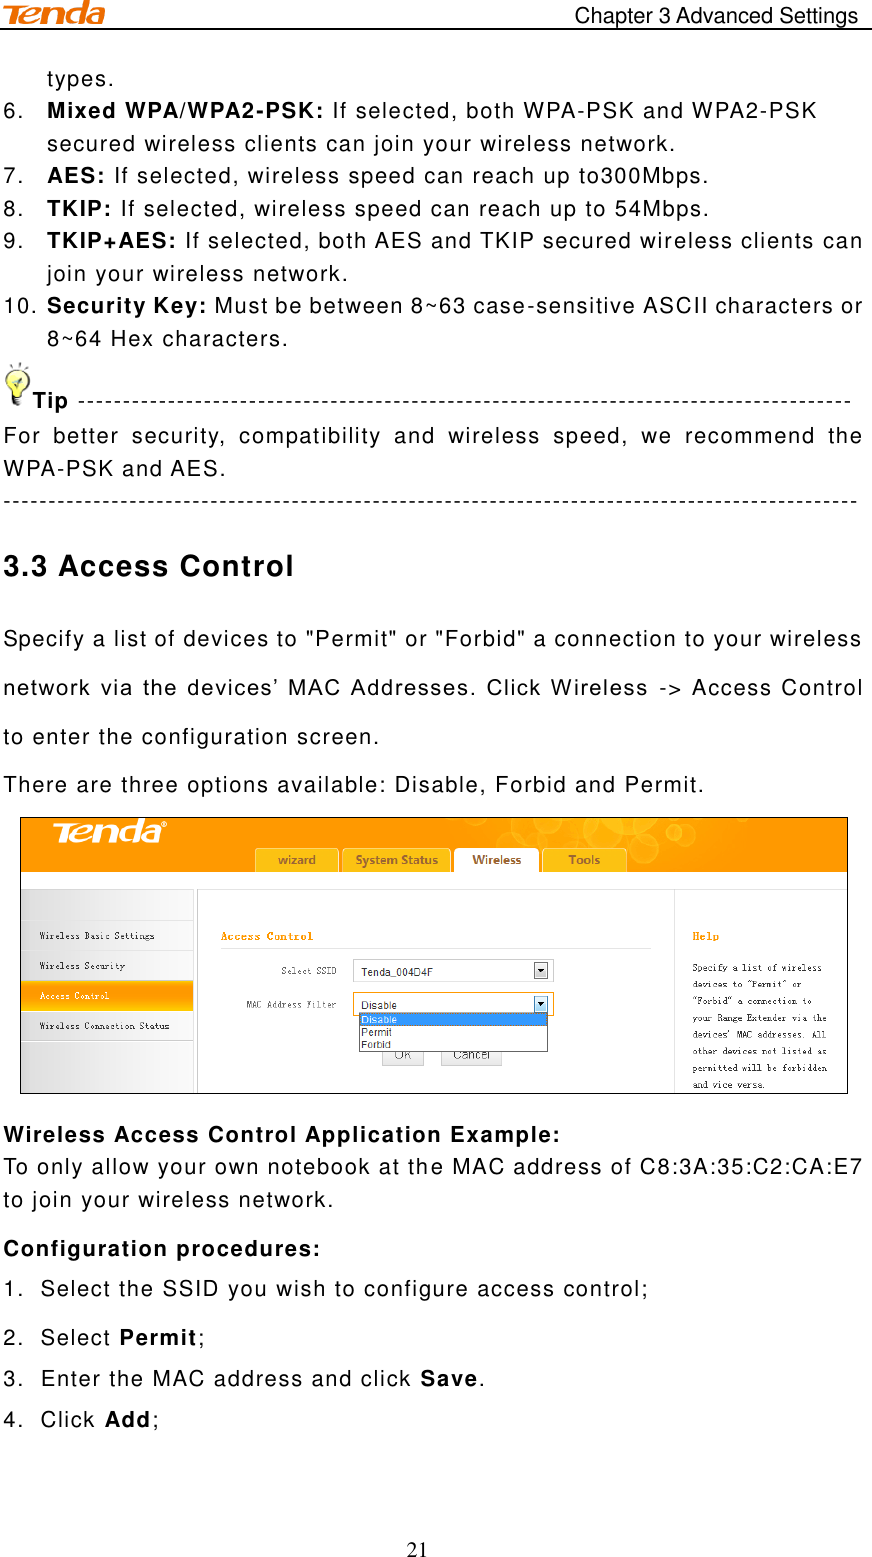                                            Chapter 3 Advanced Settings 21 types. 6. Mixed WPA/WPA2-PSK: If selected, both WPA-PSK and WPA2-PSK secured wireless clients can join your wireless network.  7. AES: If selected, wireless speed can reach up to300Mbps. 8. TKIP: If selected, wireless speed can reach up to 54Mbps. 9. TKIP+AES: If selected, both AES and TKIP secured wireless clients can join your wireless network. 10. Security Key: Must be between 8~63 case-sensitive ASCII characters or 8~64 Hex characters. Tip -------------------------------------------------------------------------------------- For  better  security,  compatibility  and  wireless  speed,  we  recommend  the WPA-PSK and AES. ----------------------------------------------------------------------------------------------- 3.3 Access Control Specify a list of devices to &quot;Permit&quot; or &quot;Forbid&quot; a connection to your wireless  network  via  the  devices’  MAC  Addresses.  Click W ireless  -&gt; Access Control to enter the configuration screen. There are three options available: Disable, Forbid and Permit.   Wireless Access Control Application Example: To only allow your own notebook at the MAC address of C8:3A:35:C2:CA:E7 to join your wireless network. Configuration procedures: 1.  Select the SSID you wish to configure access control; 2.  Select Permit; 3.  Enter the MAC address and click Save. 4.  Click Add; 